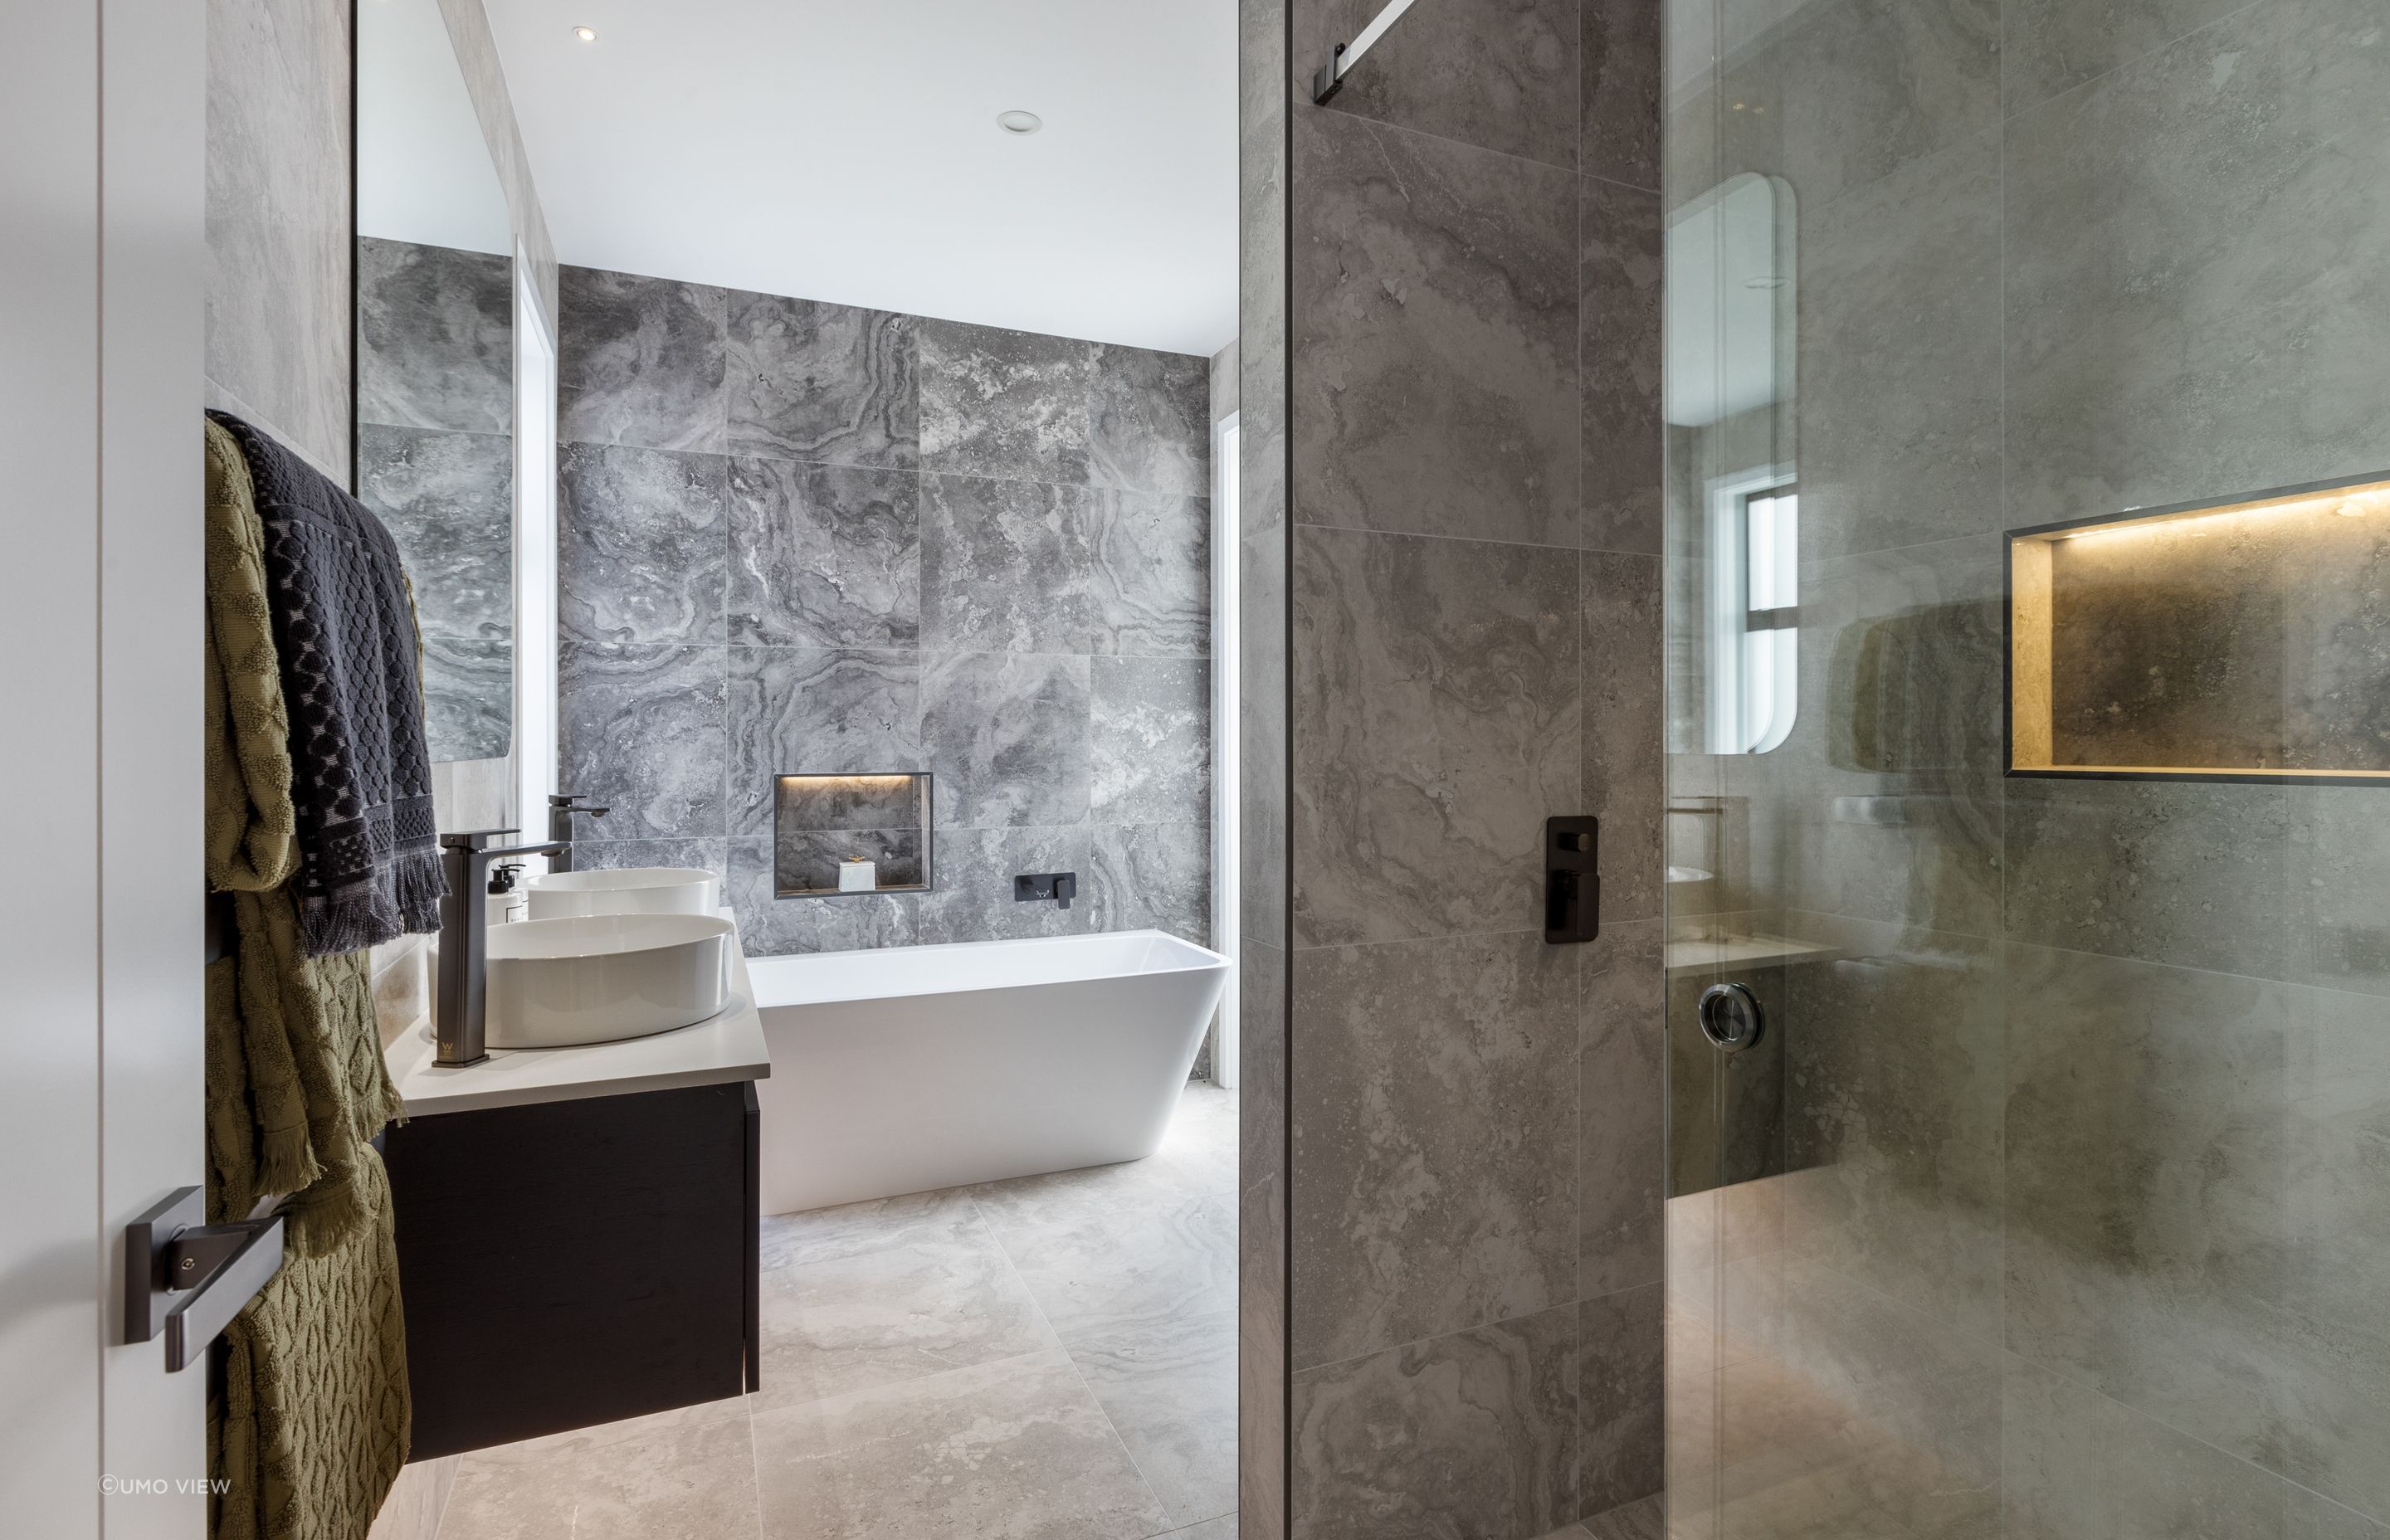 “A standout feature in both bathrooms is the innovative use of glass sliding doors for the showers. The doors not only add a modern touch but also enhance the sense of openness within the bathrooms.”